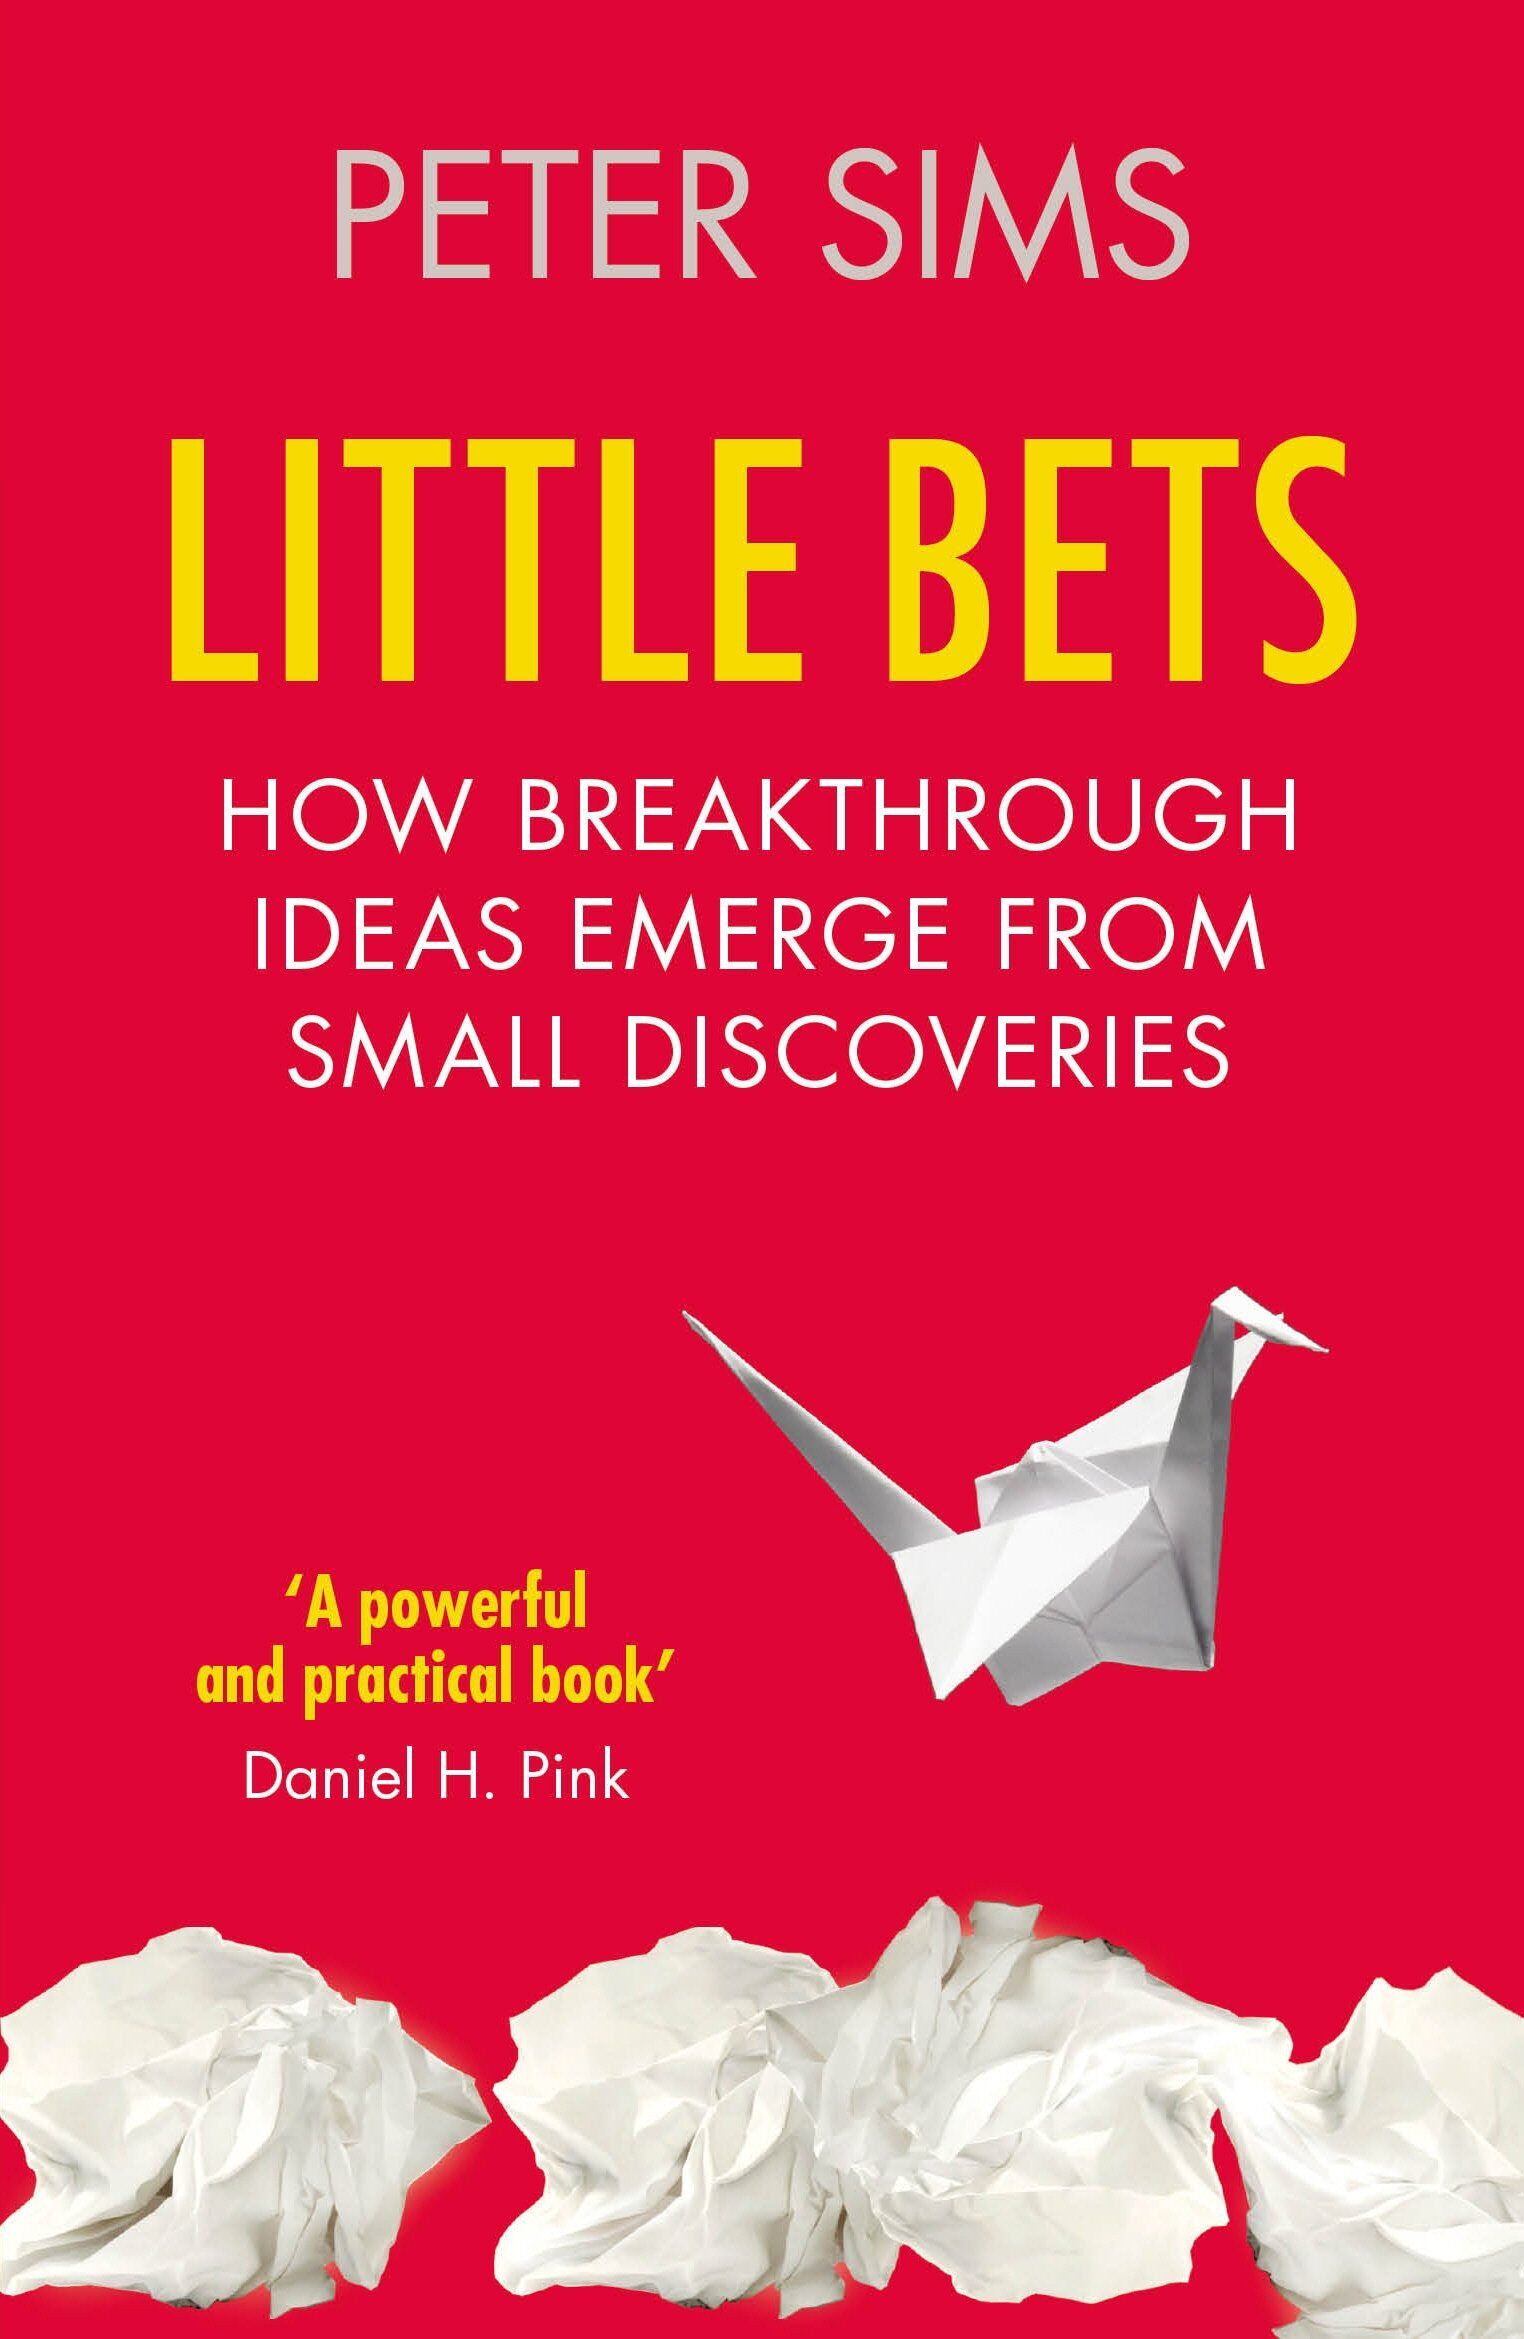 『Little Bets』  ～How Breakthrough Ideas Emerge from Small Discoveries～